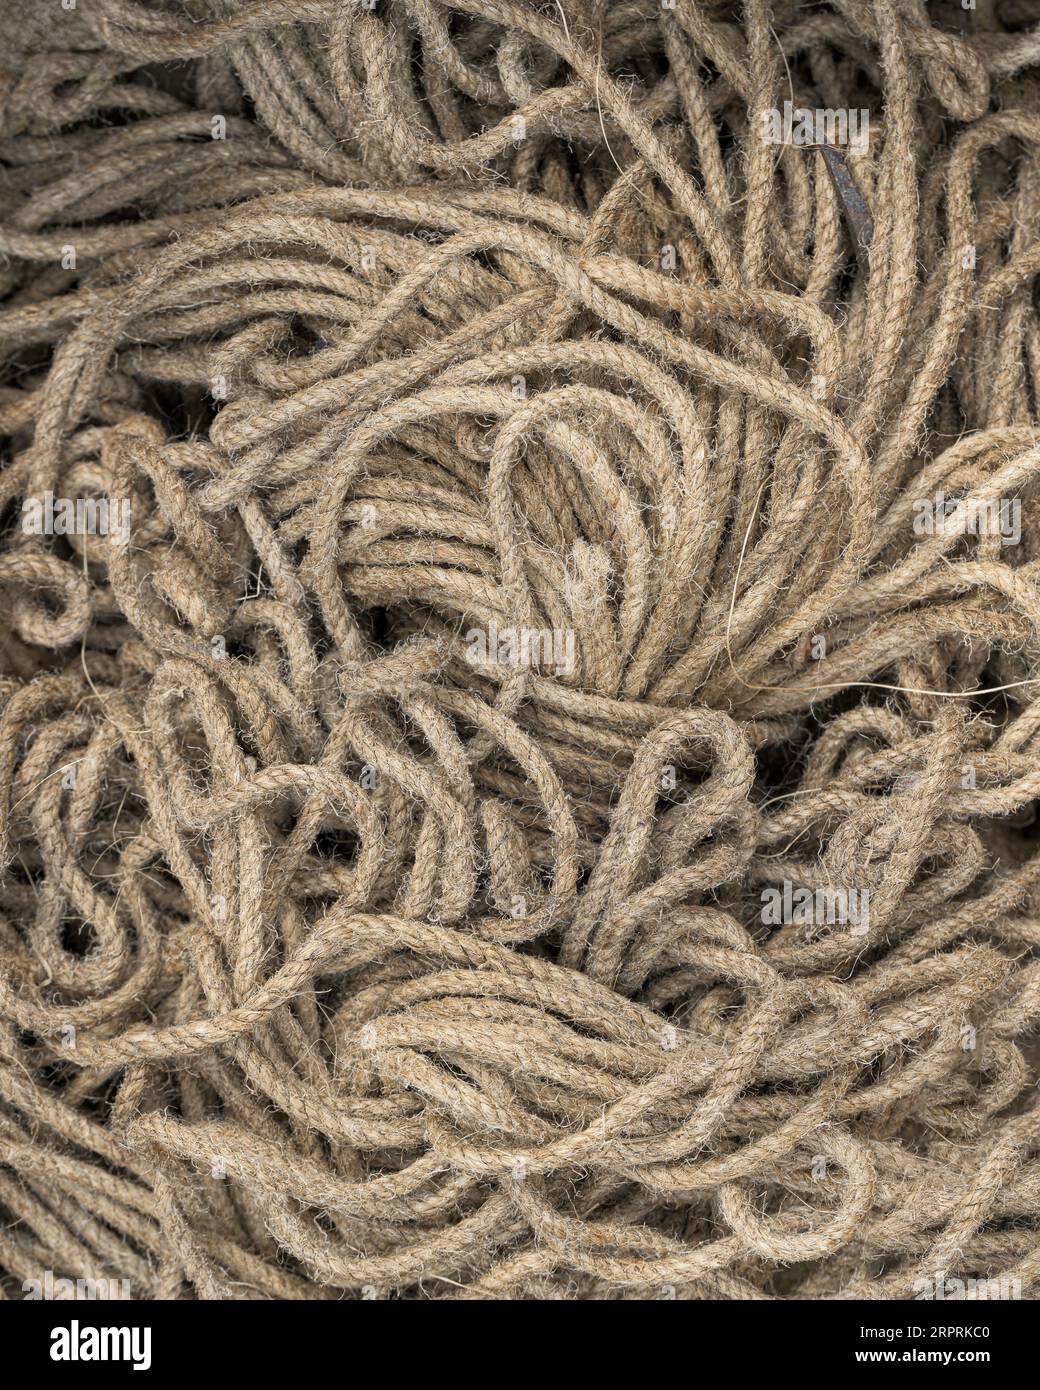 Close up of a pile of brown yarn Stock Photo